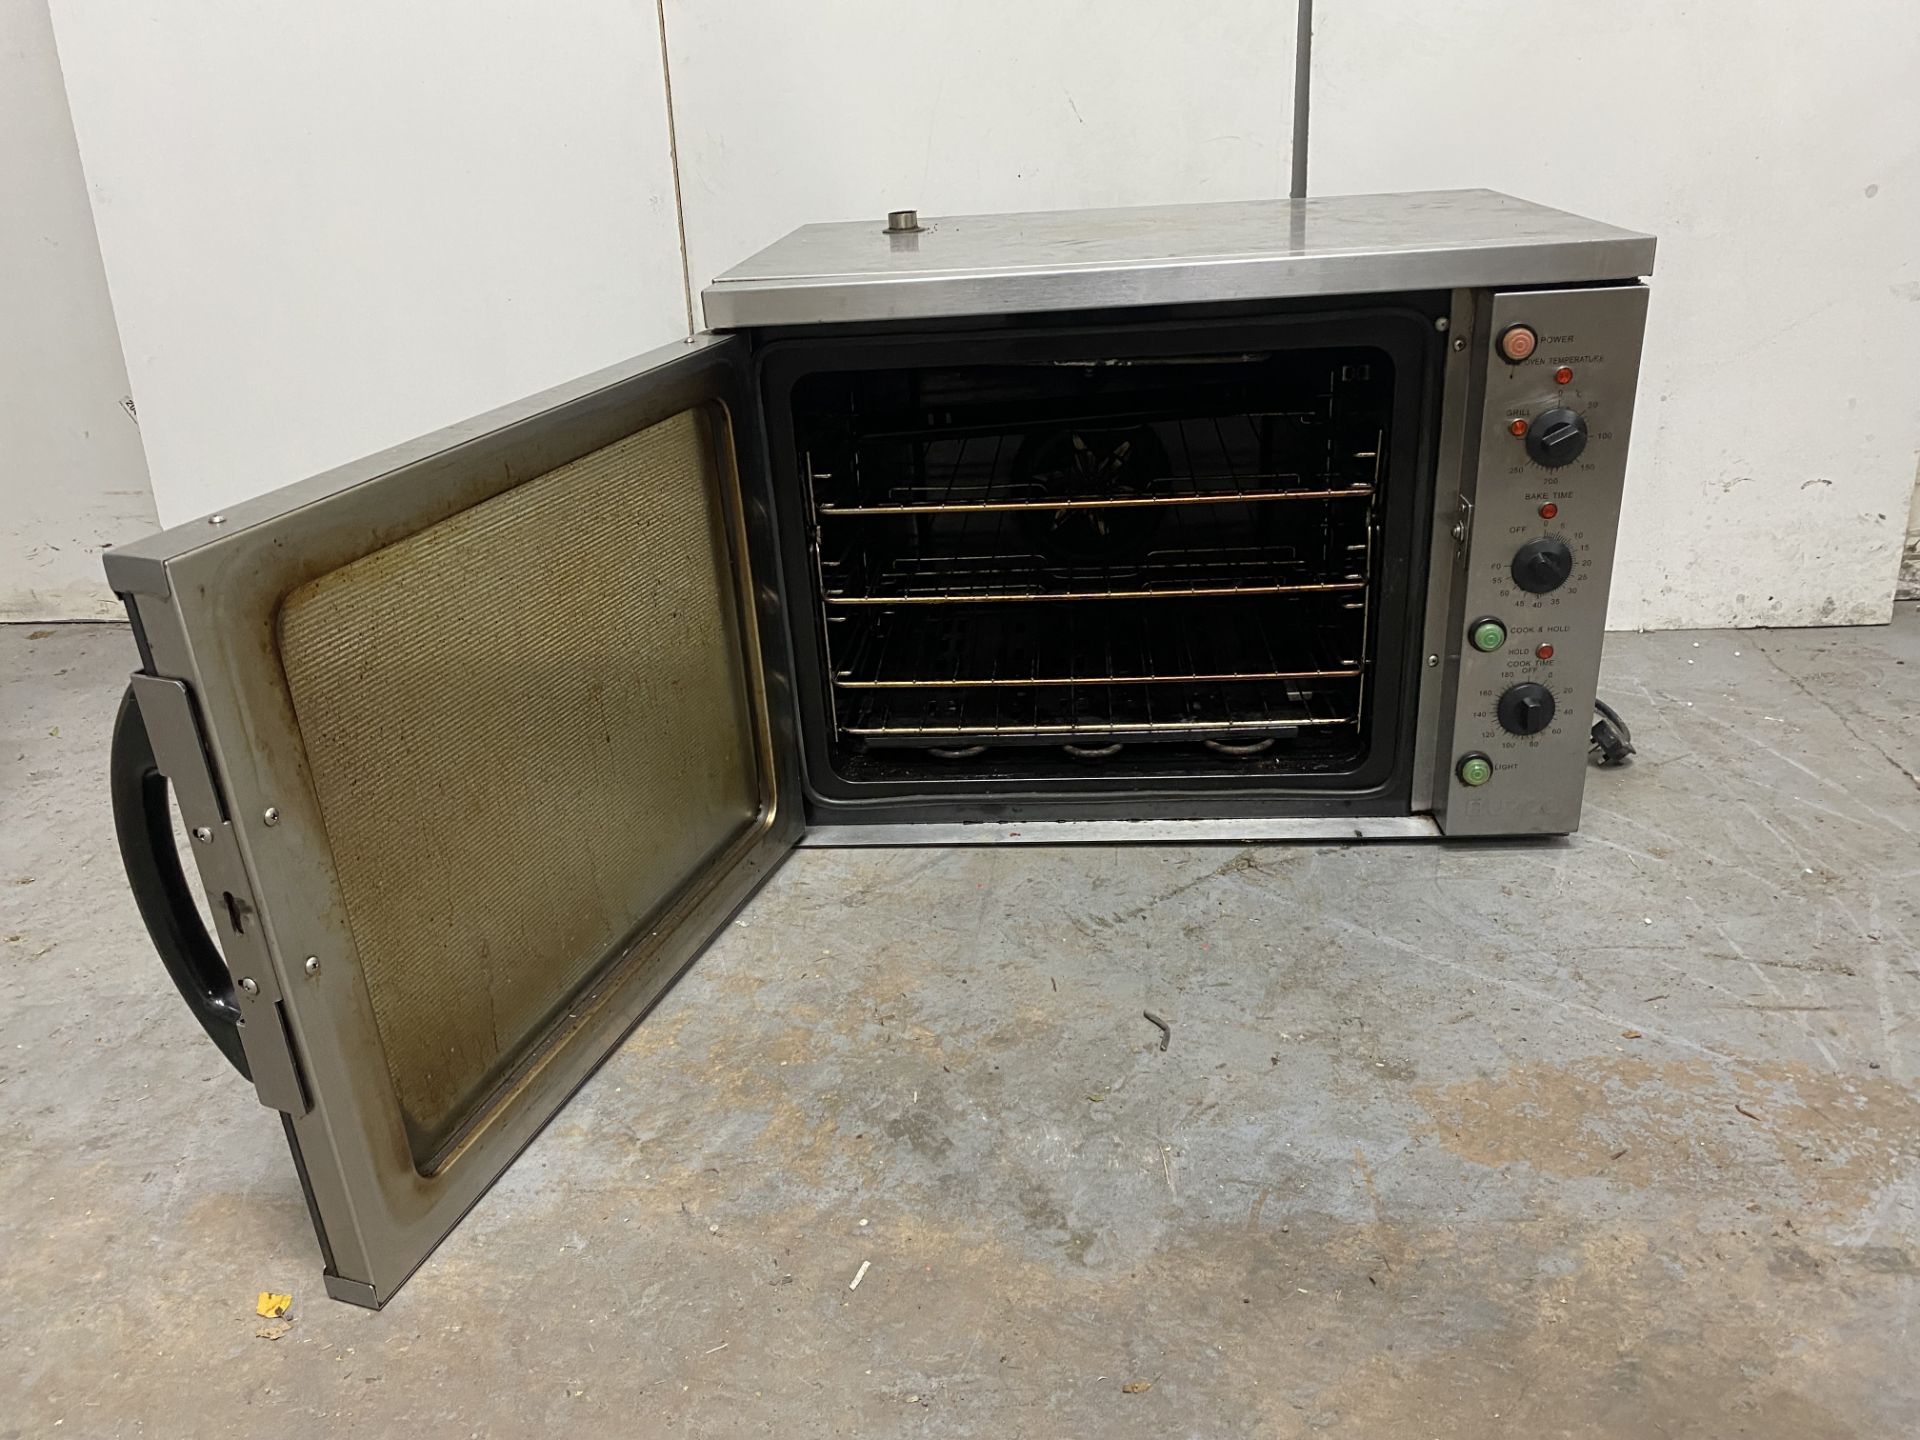 Burco CTCO01 Large Commercial Convection Oven - Image 4 of 8